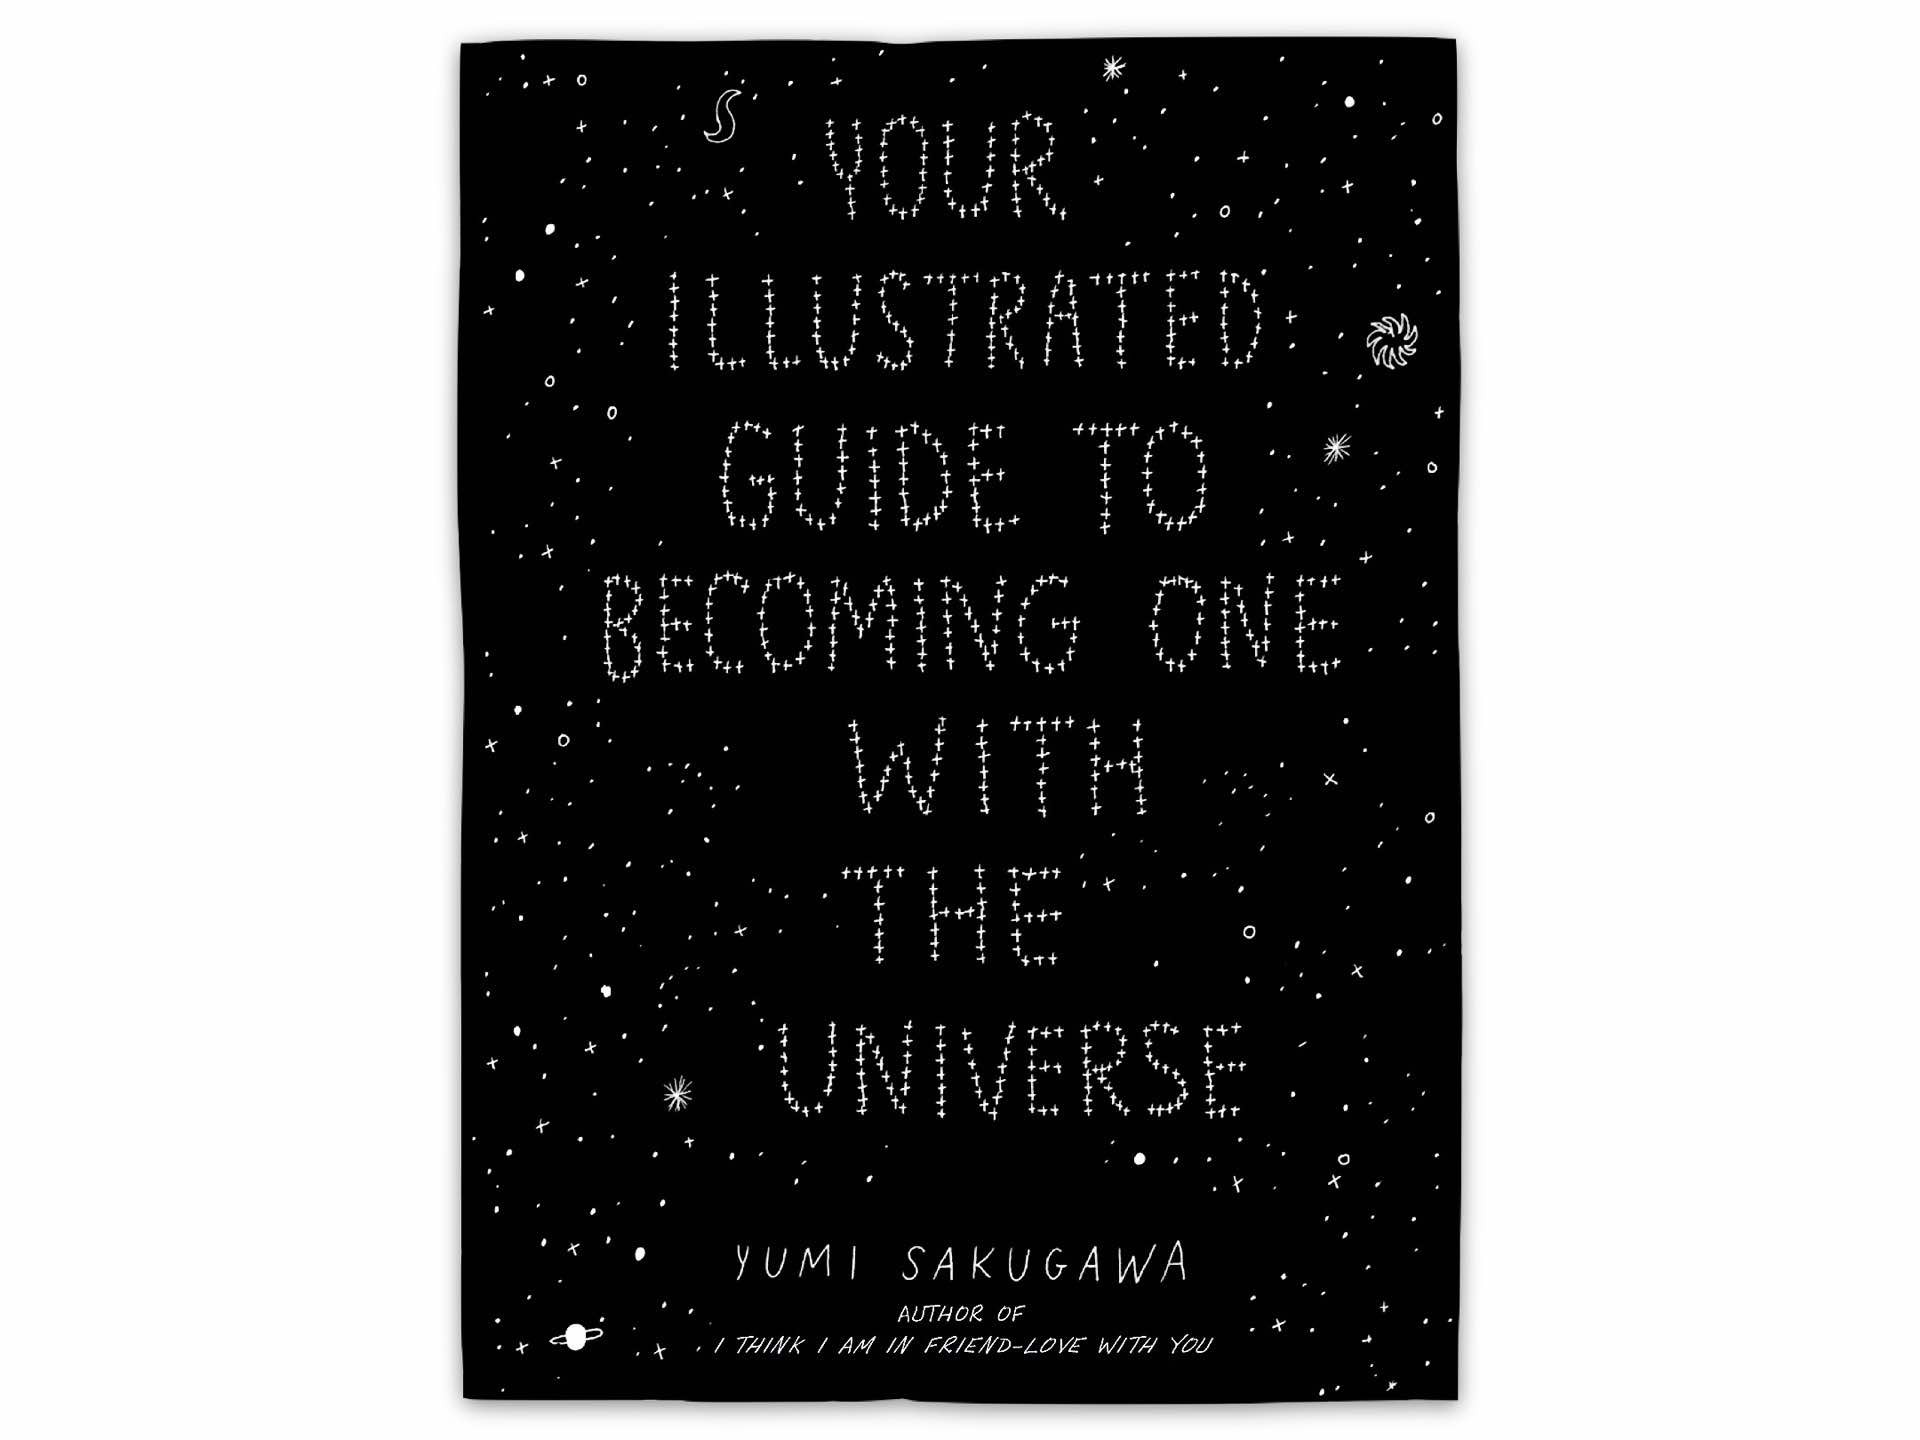 Your Illustrated Guide to Becoming One with the Universe by Yumi Sakugawa. ($18 hardcover)